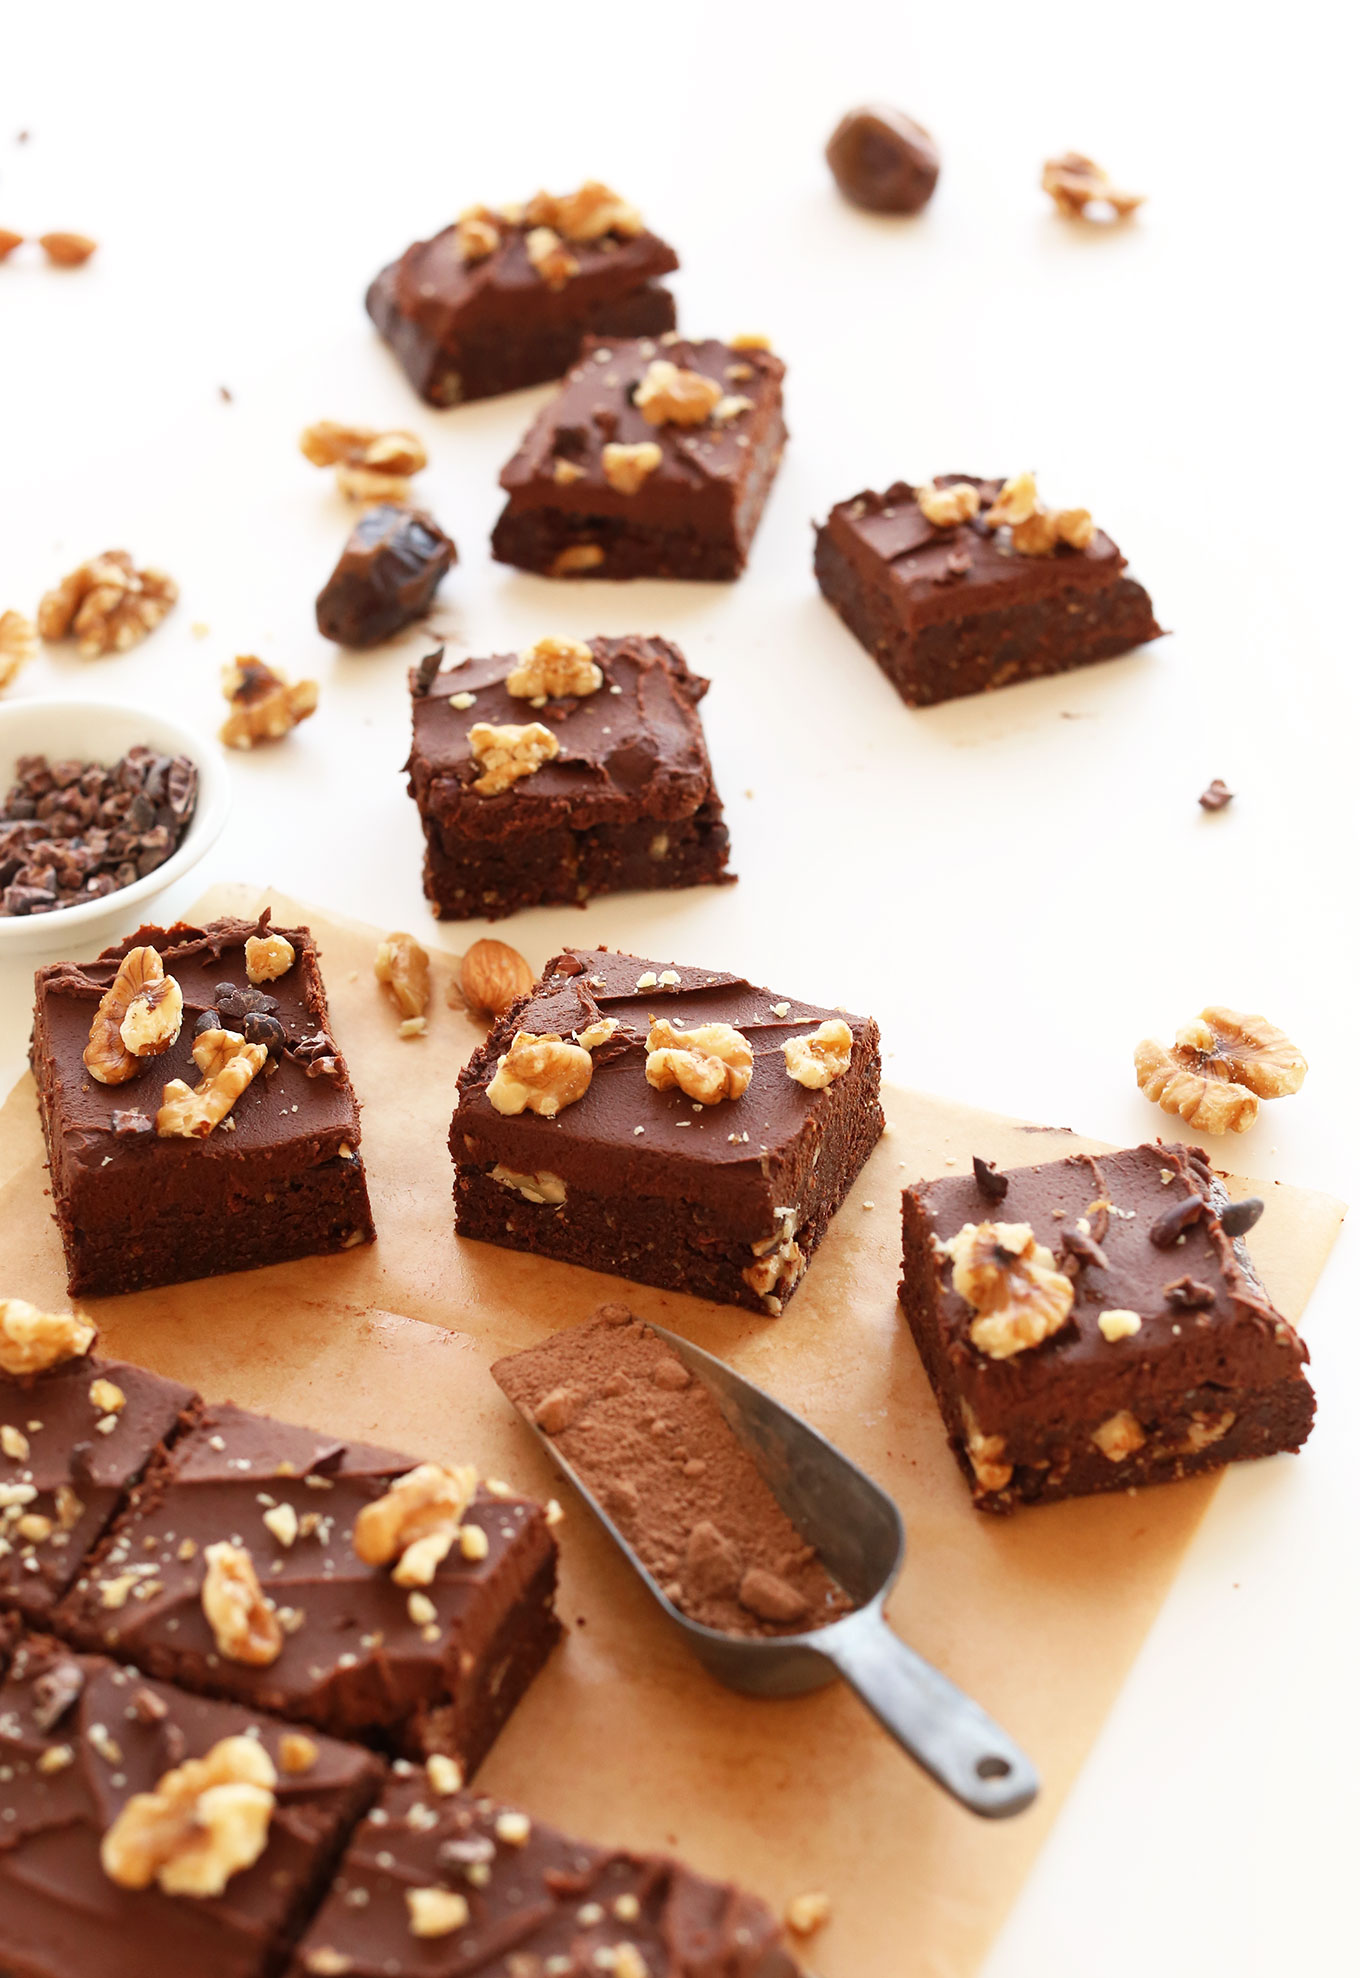 Squares of the Best Raw Vegan Brownies with Chocolate Ganache Frosting